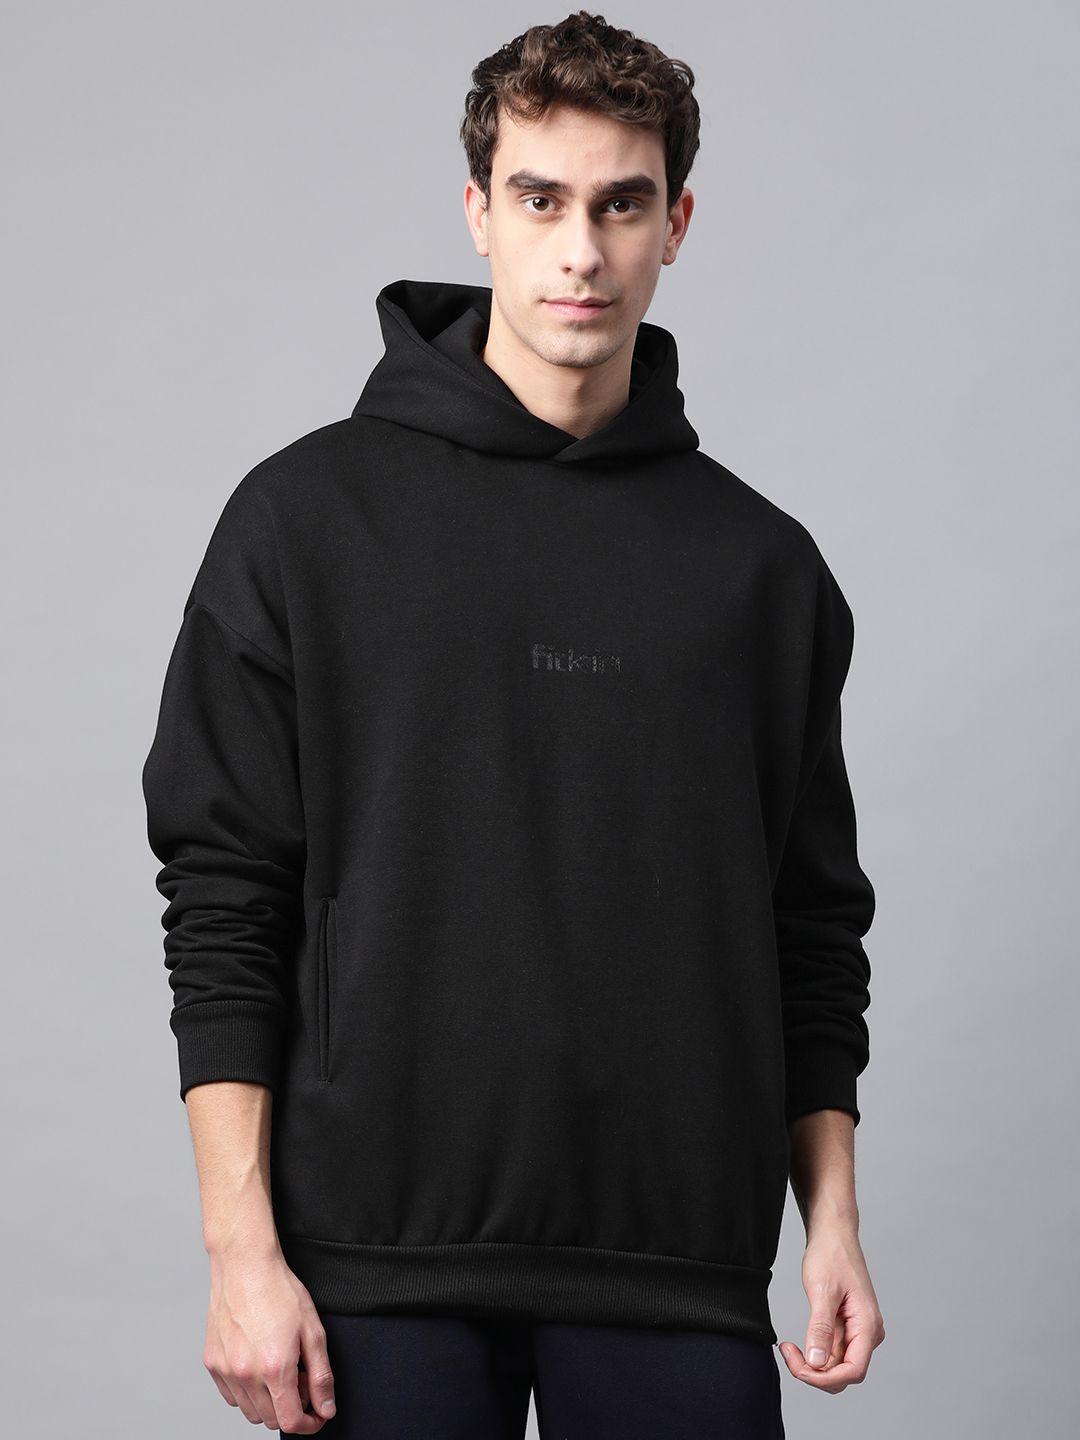 fitkin men black solid hooded winter sweatshirt with brand logo print detail